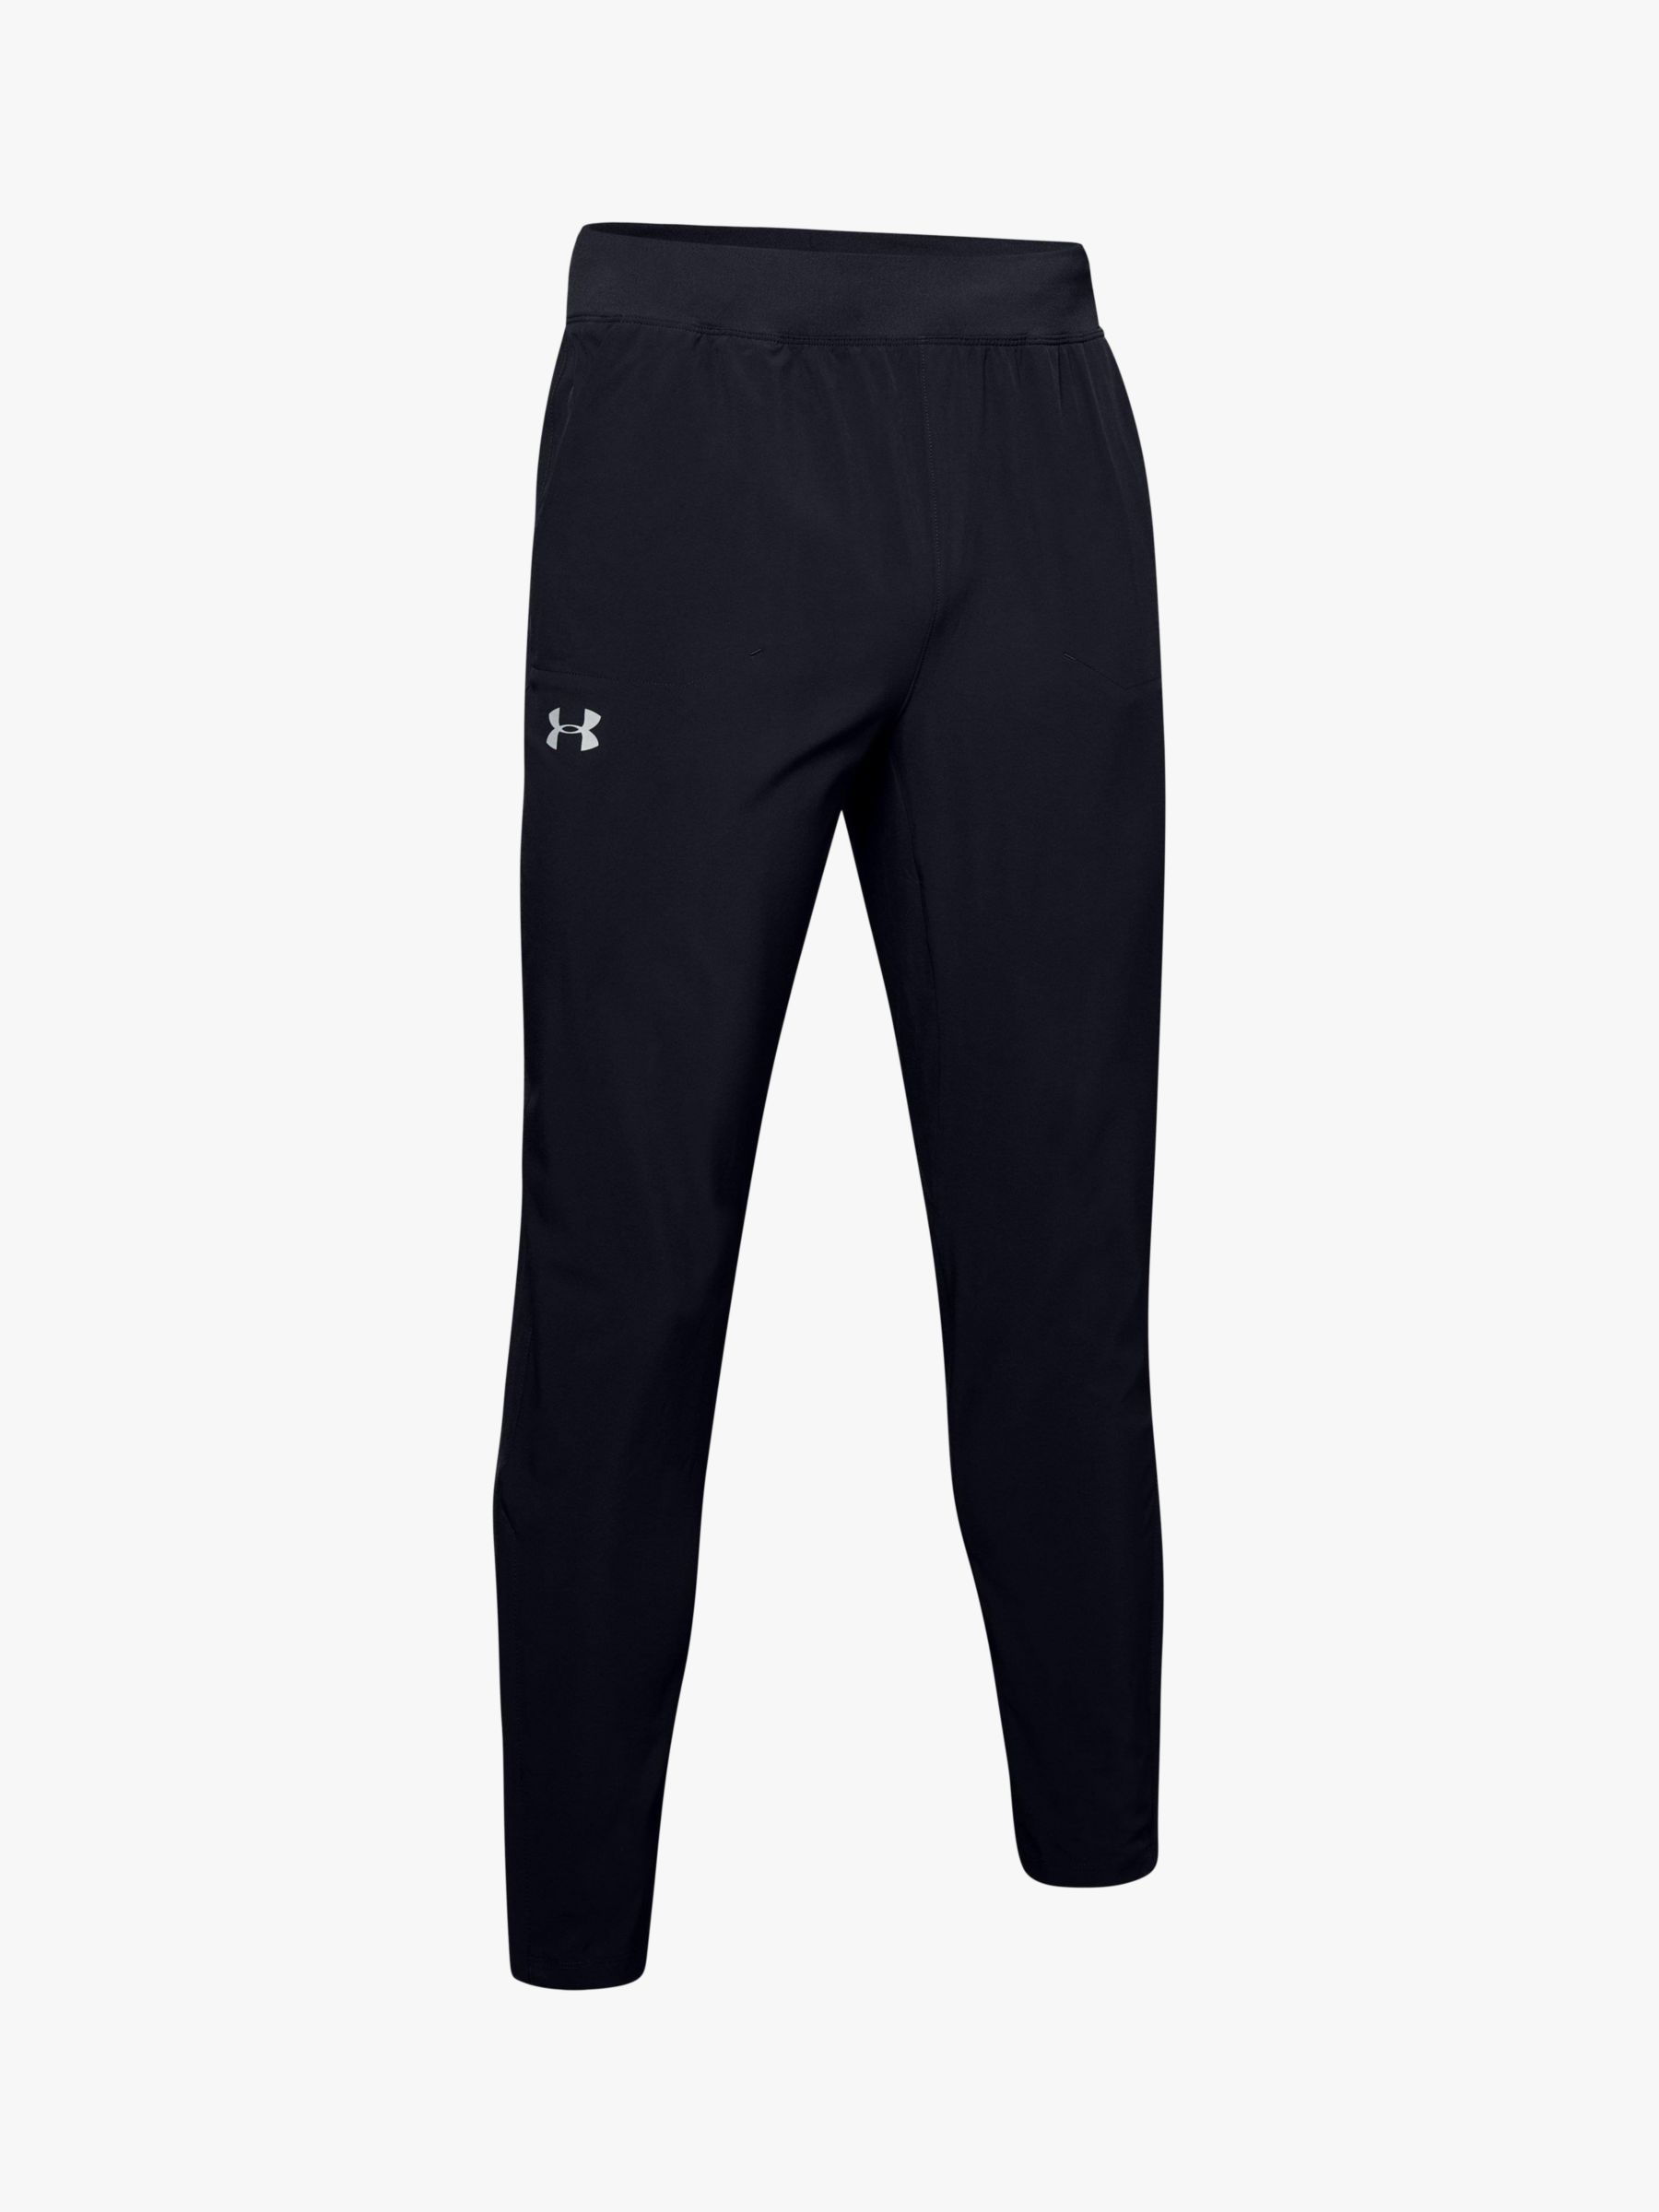 boys under armour tracksuit bottoms